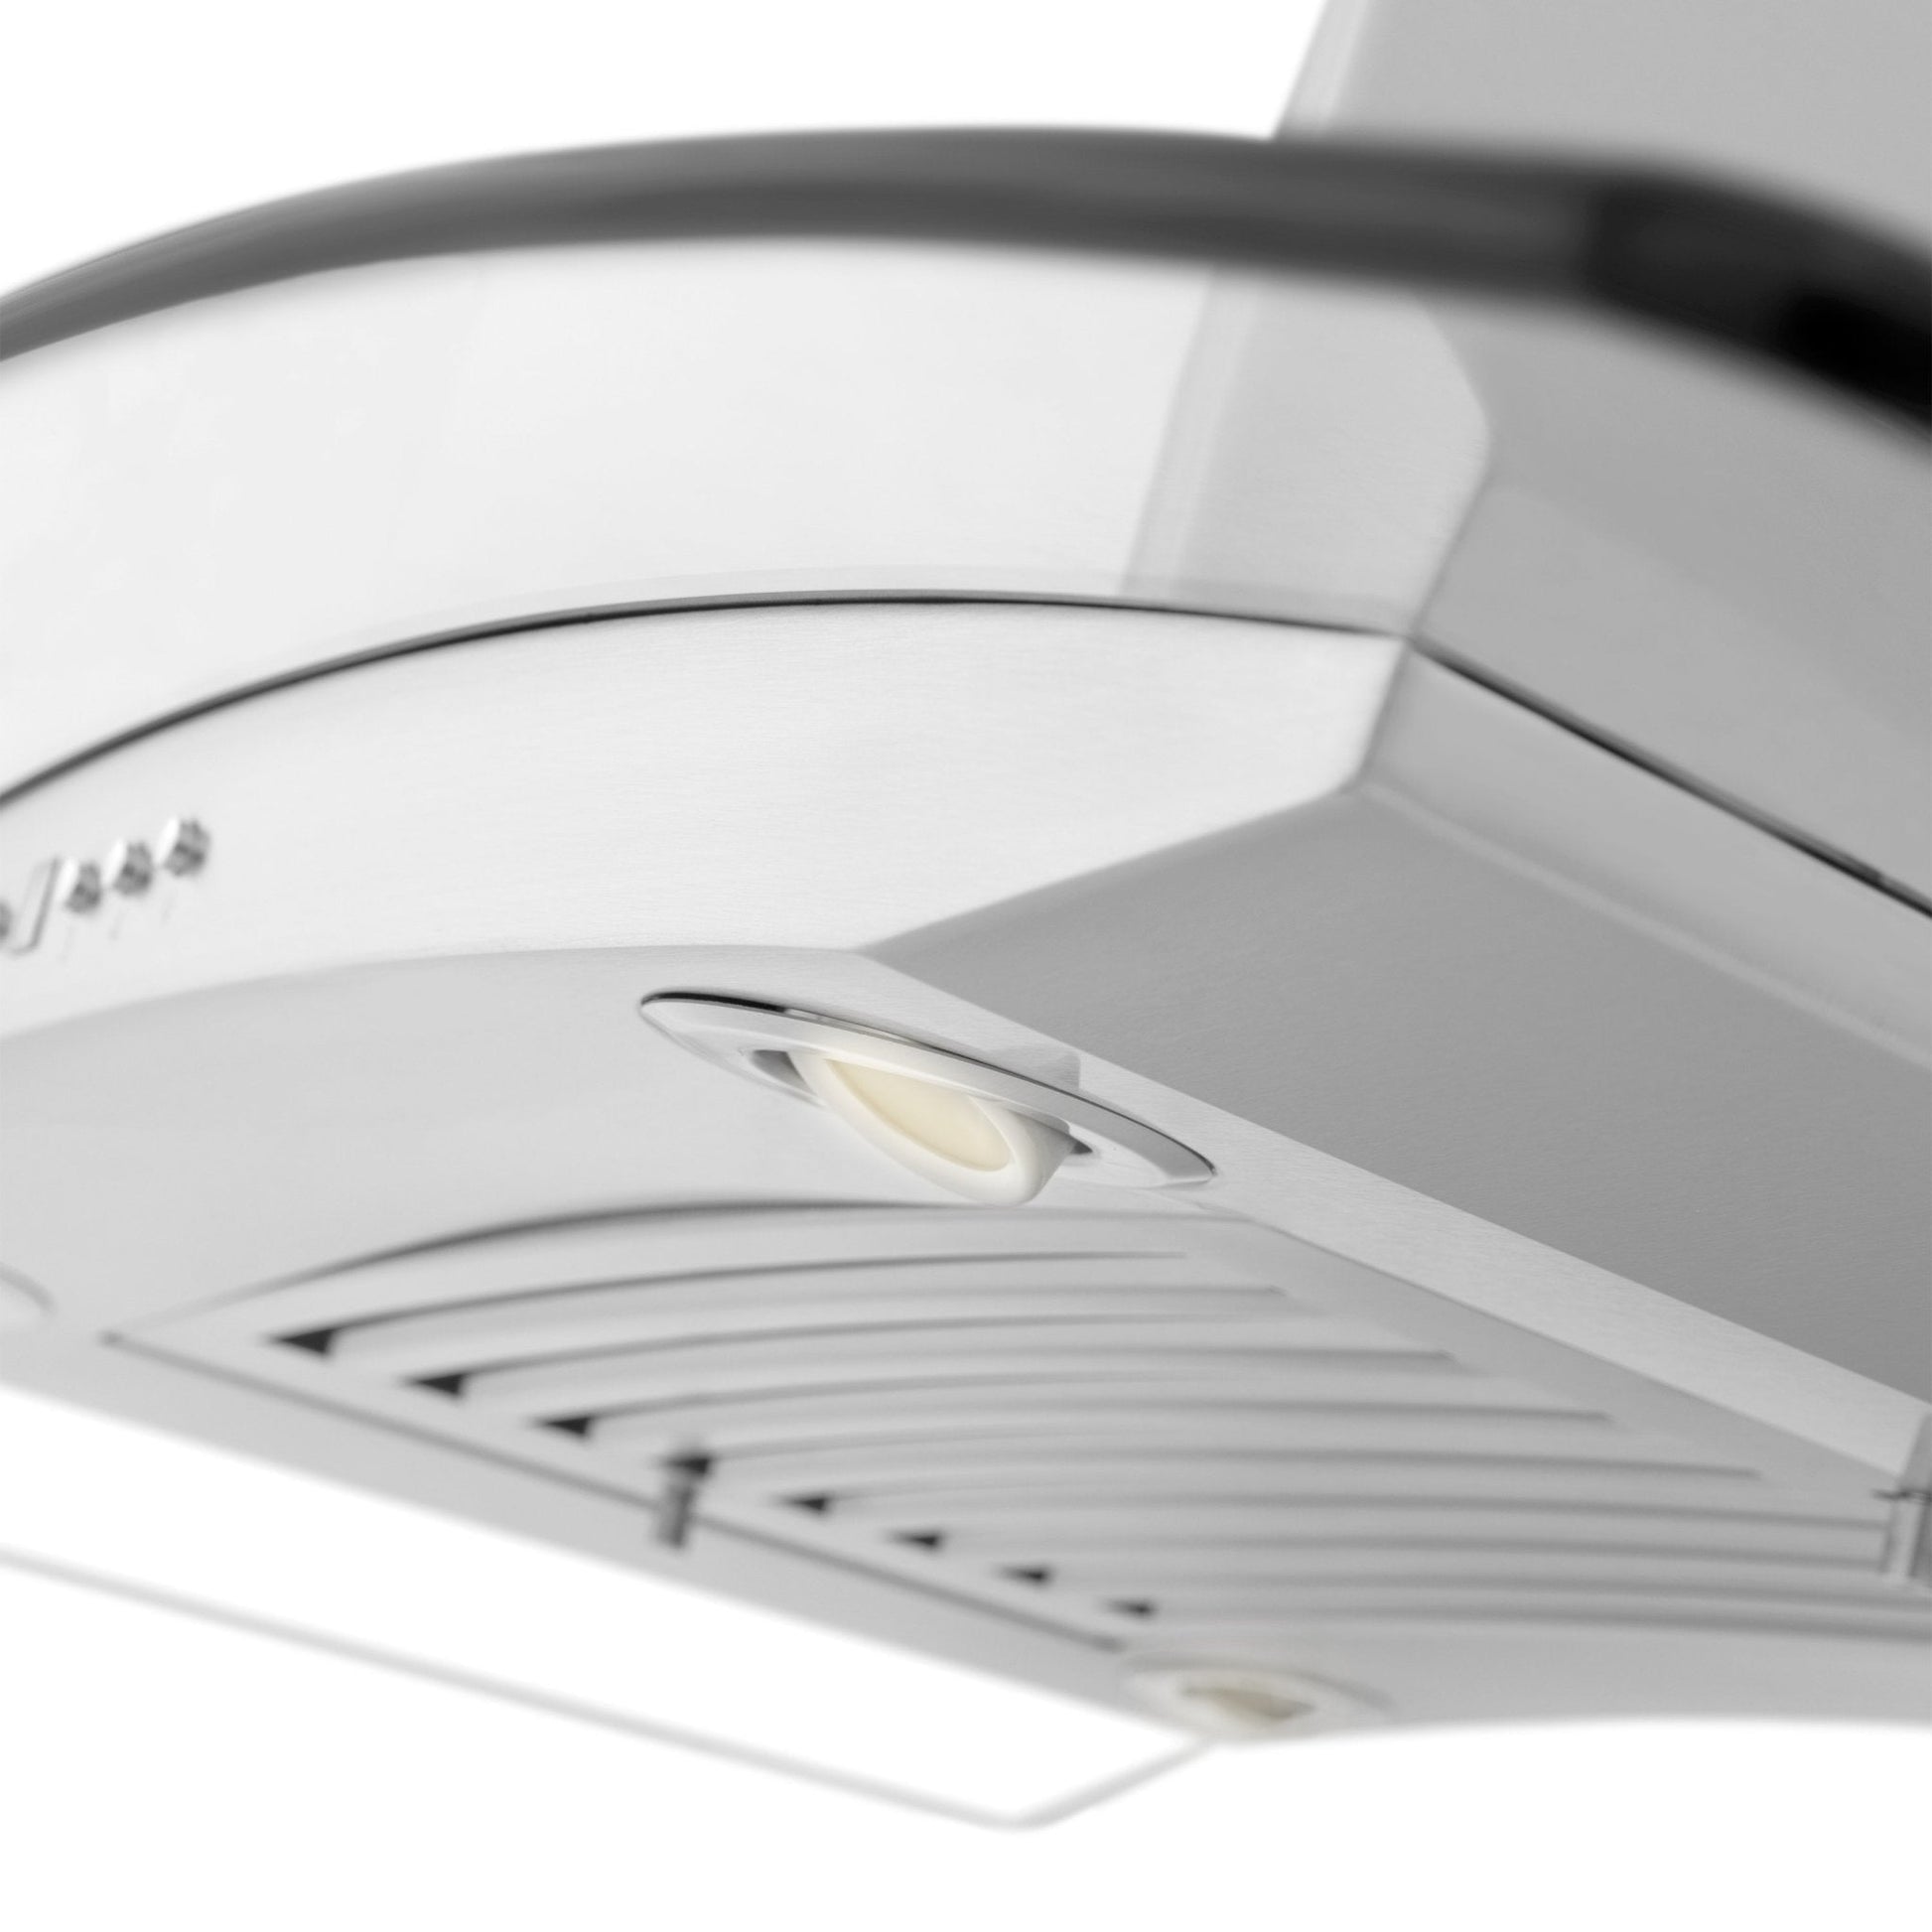 Directional LED lighting on ZLINE Convertible Vent Island Mount Range Hood in Stainless Steel and Glass (GL14i)